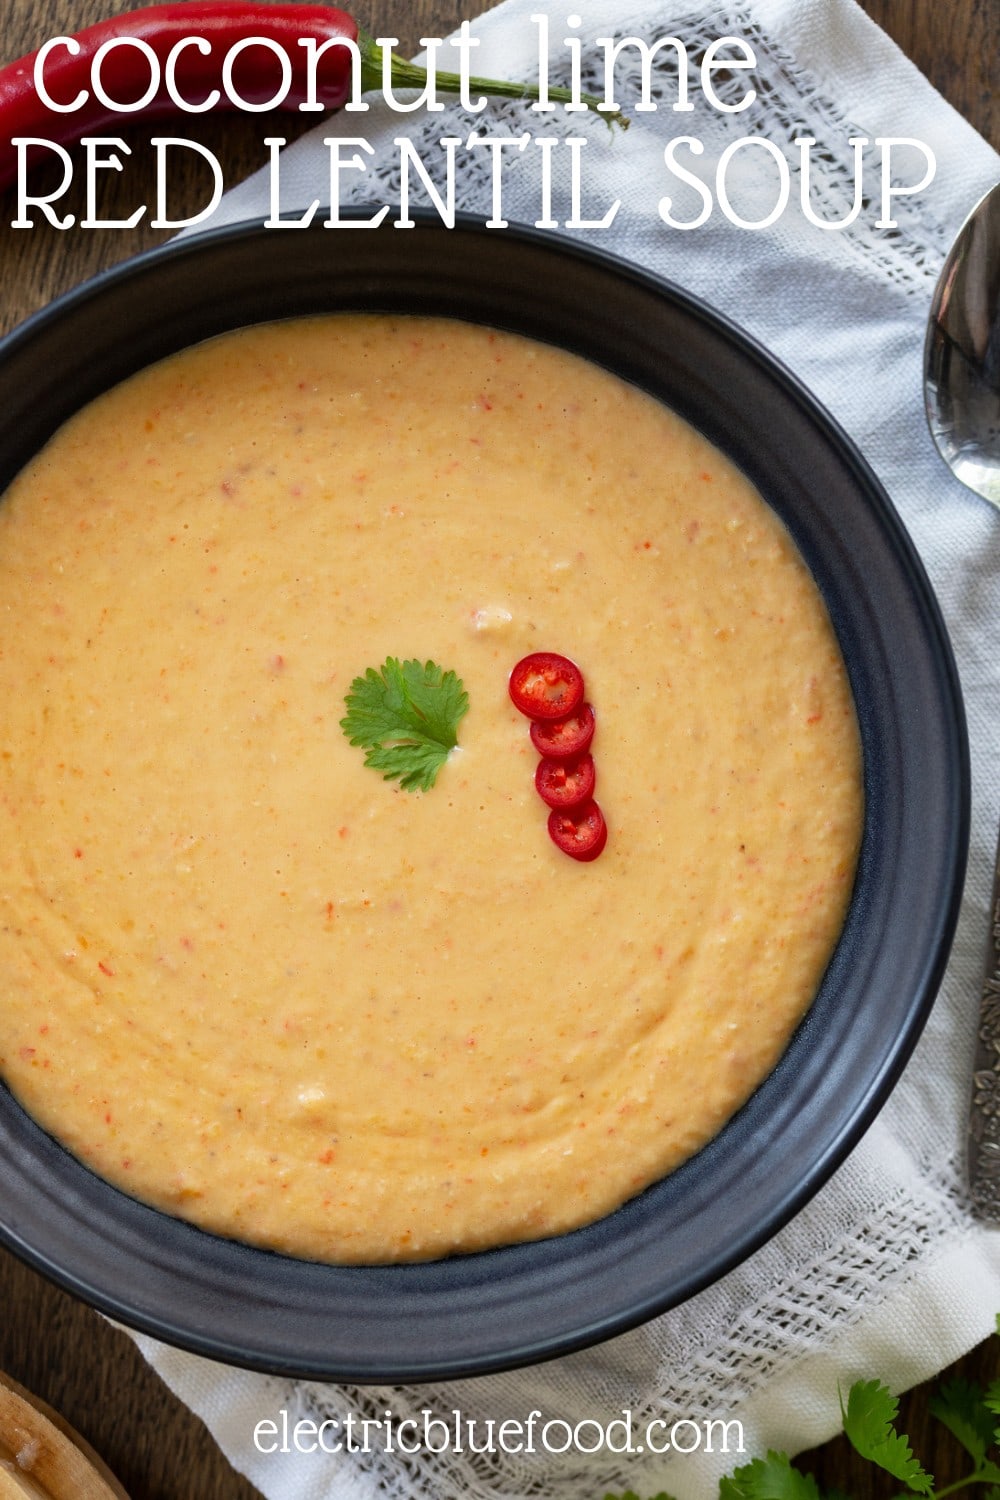 This coconut lime red lentil soup with chili is rady in 30 minutes. This soup is fully vegan. A spicy blended soup inspired by the flavours of East Asian cuisine.